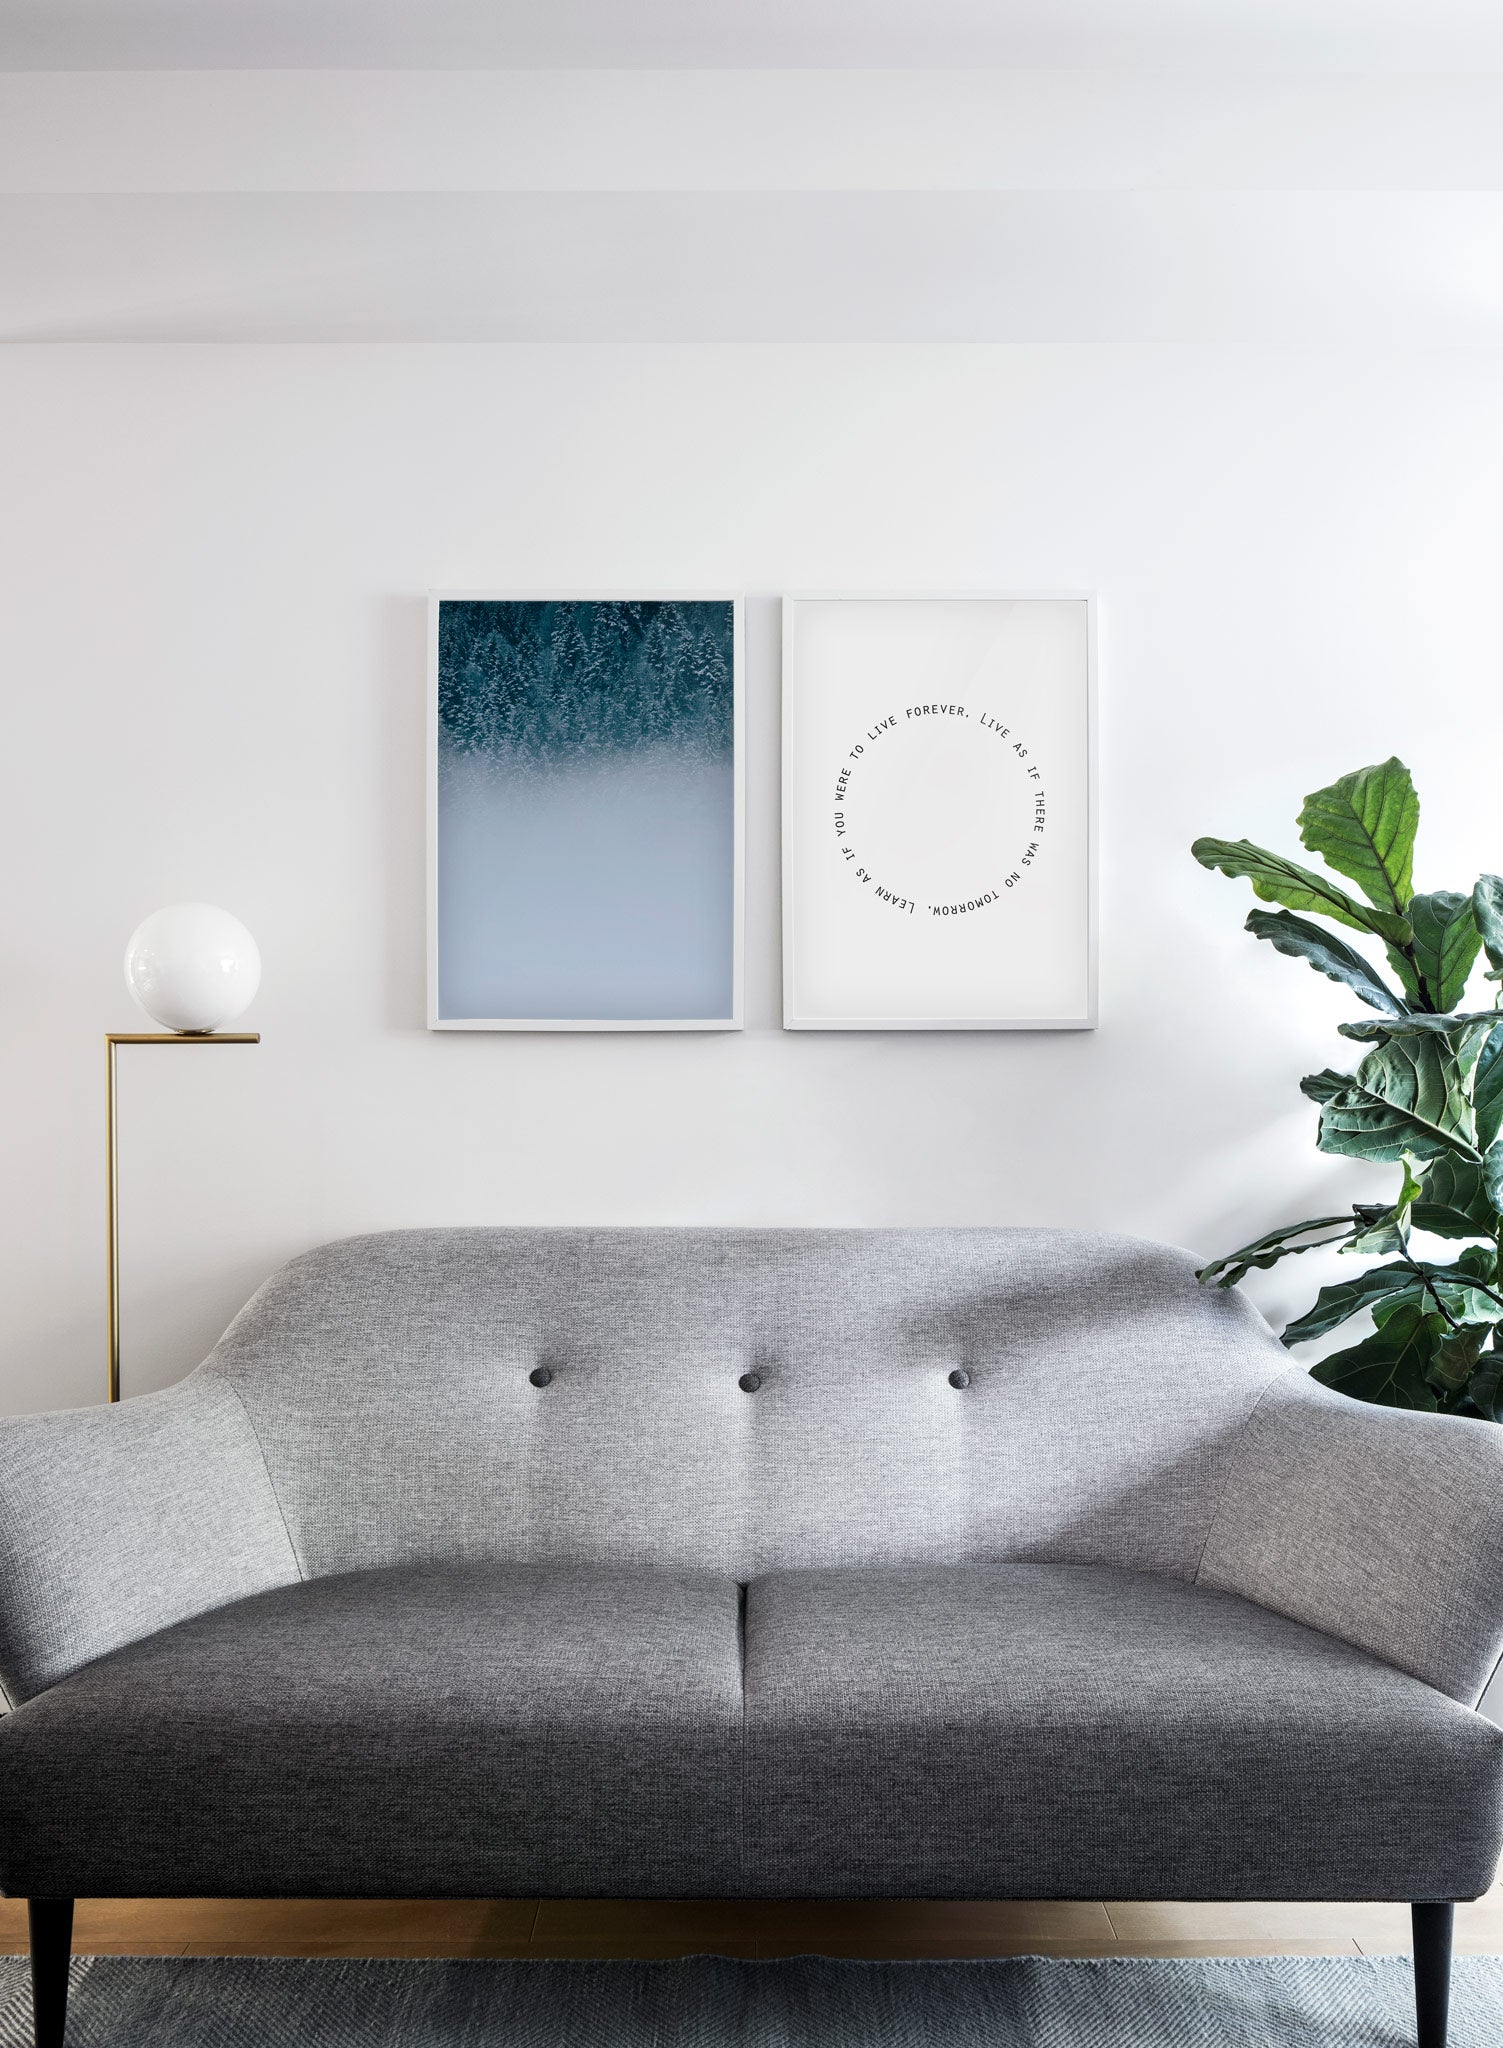 Minimalist poster by Opposite Wall with misty Winter Forest photography - Living room couch